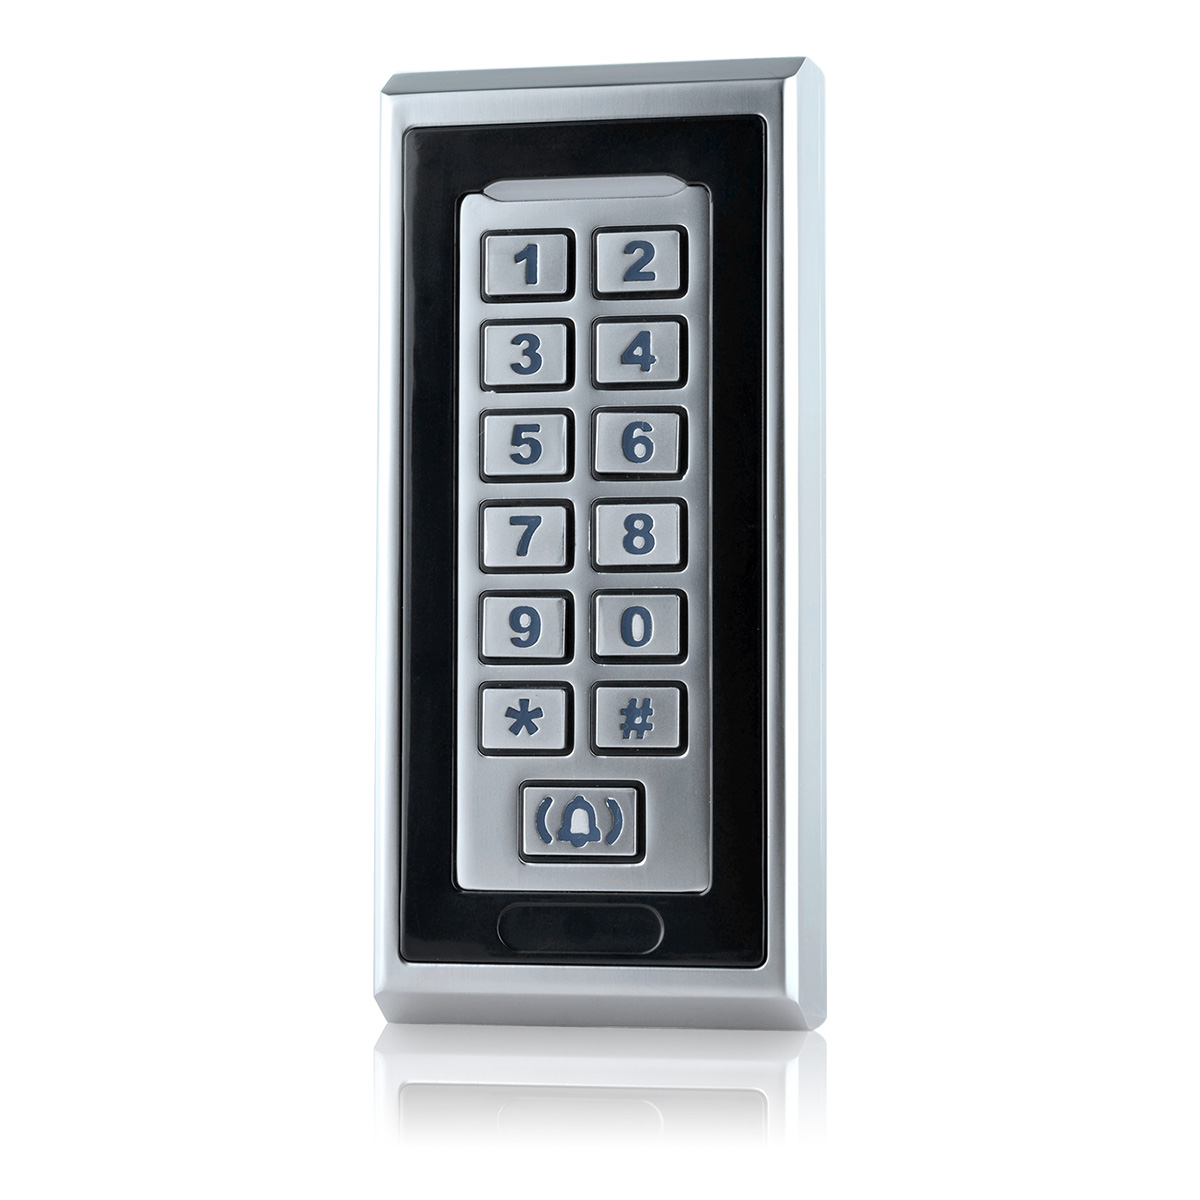 ZKTco-ZK-FP870E-Metal-Touch-Access-Controller-ID-Card-Password-Access-Control-System-Attendance-Mach-1504237-1